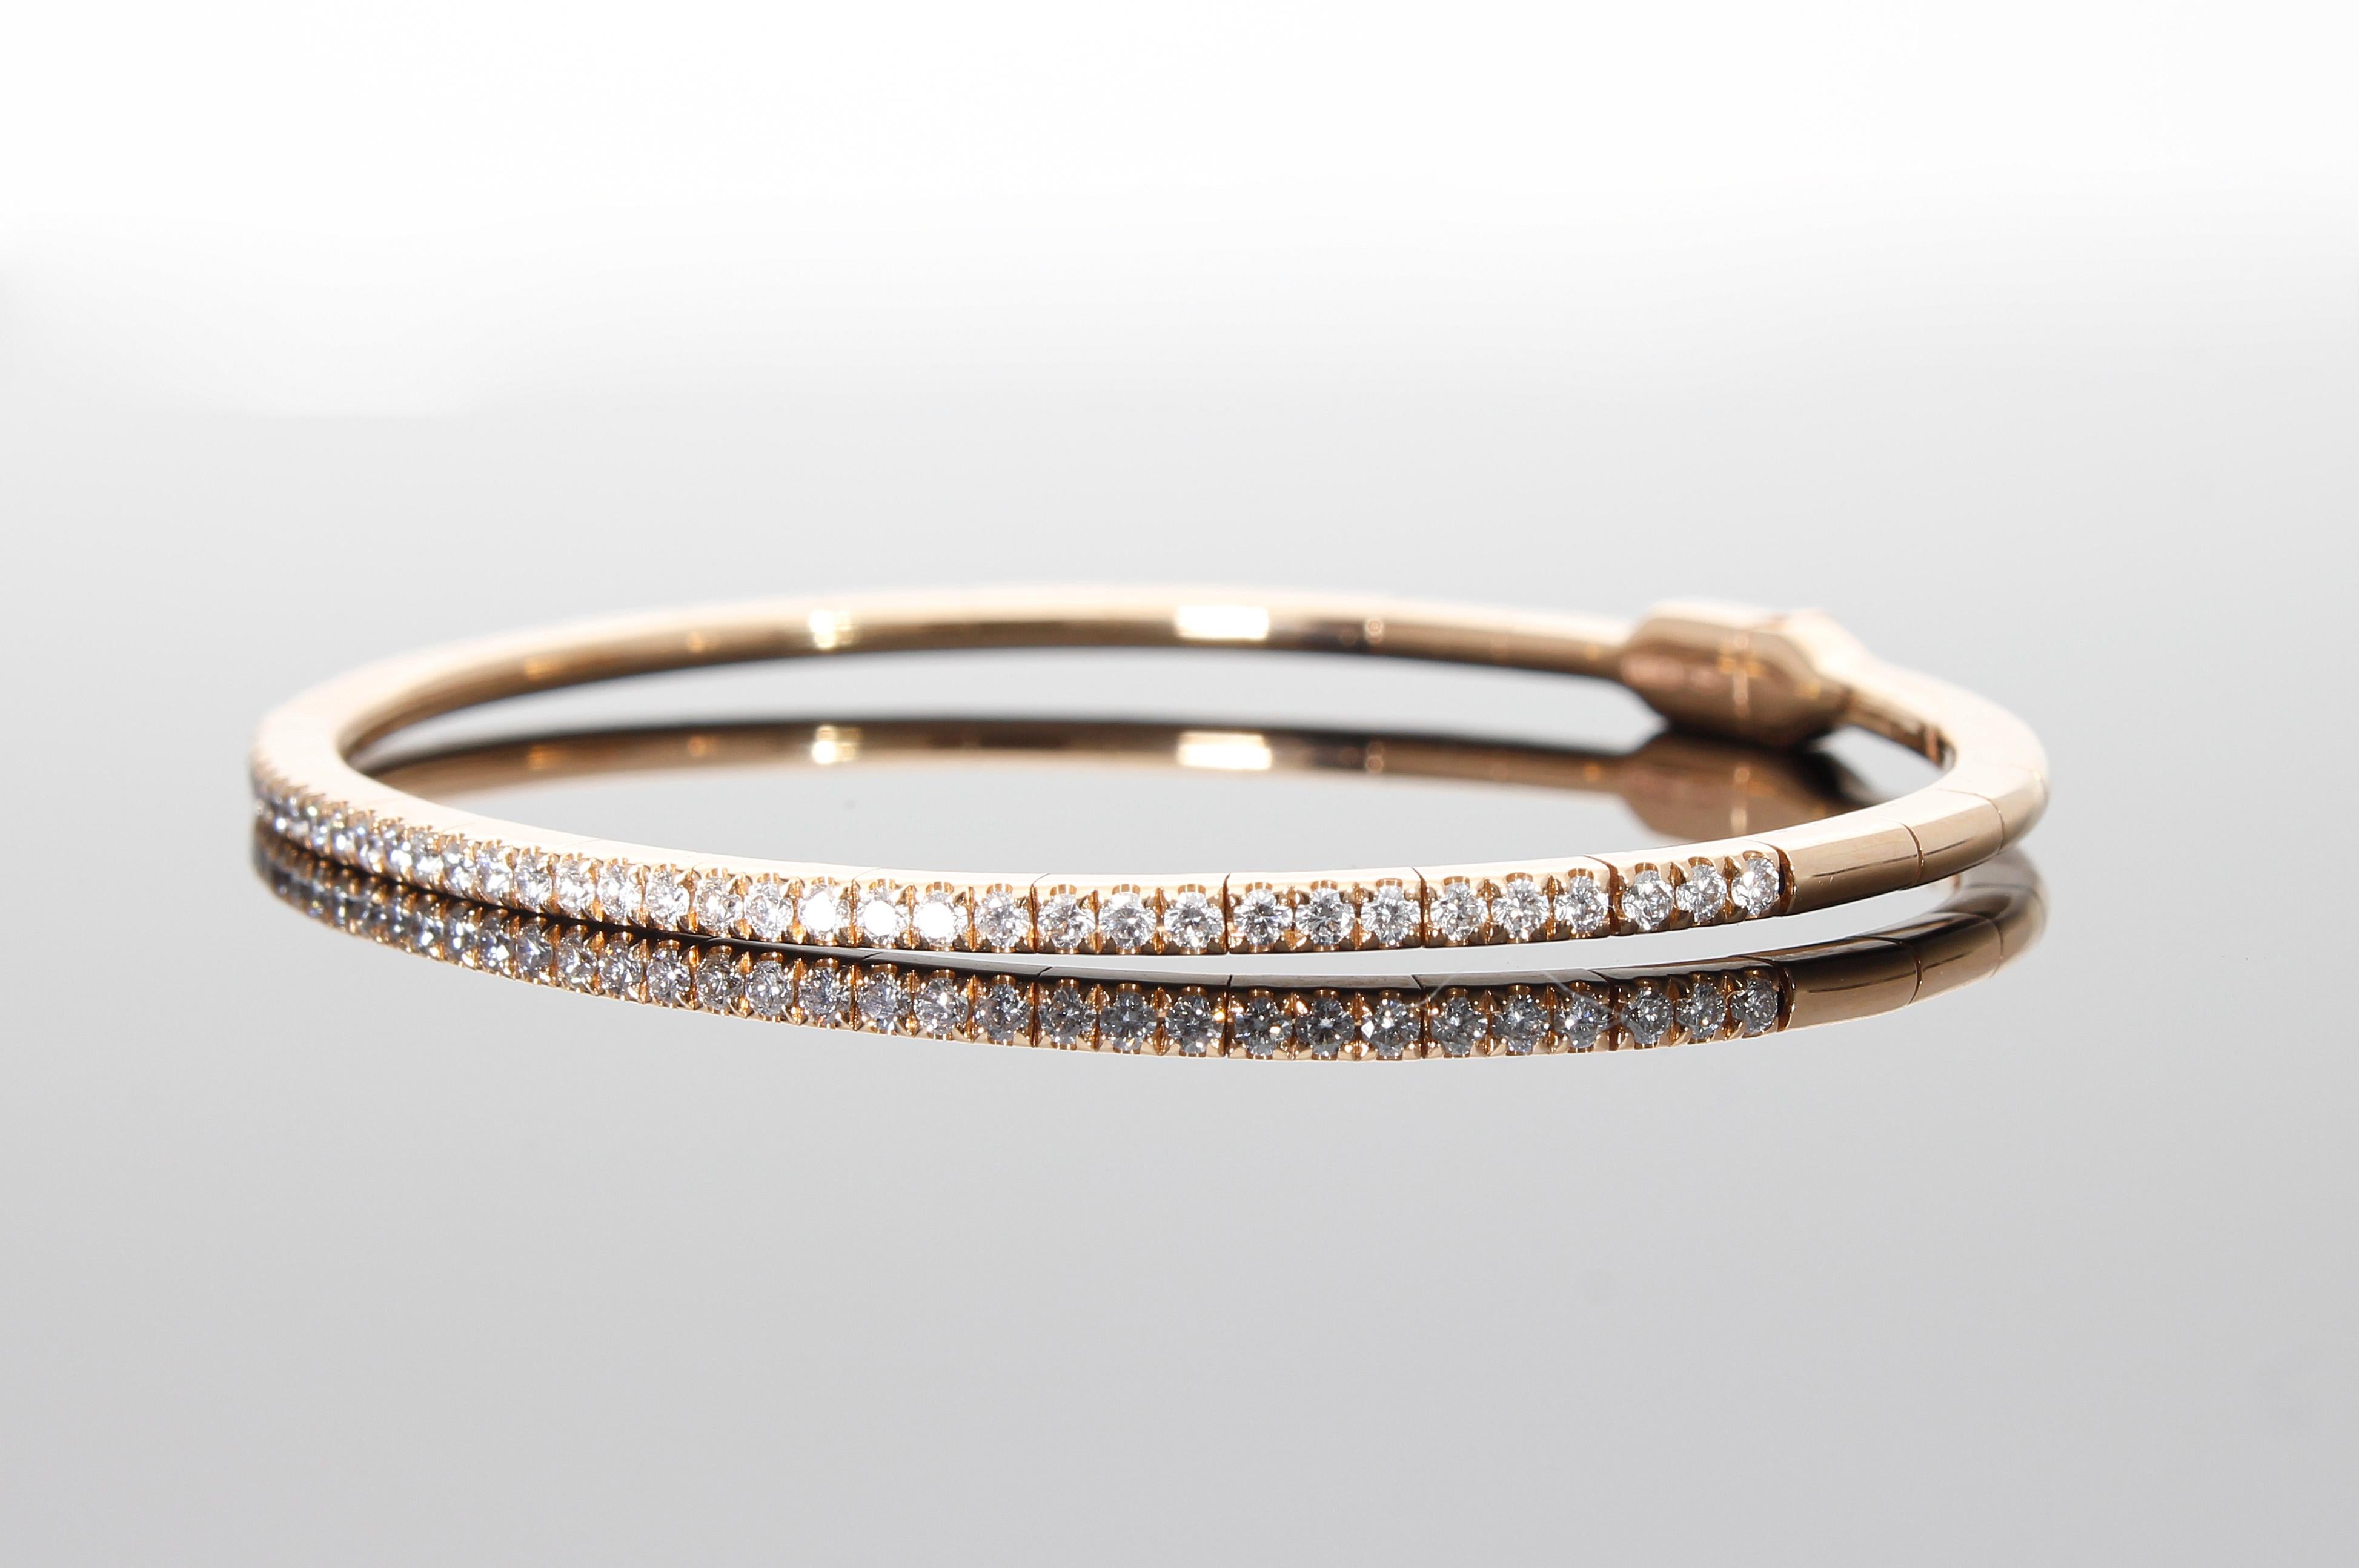 Brilliant Cut Semi-rigid bracelet with a row of 0.75 ct of Diamonds. Gold 18 Kt. Made in Italy For Sale